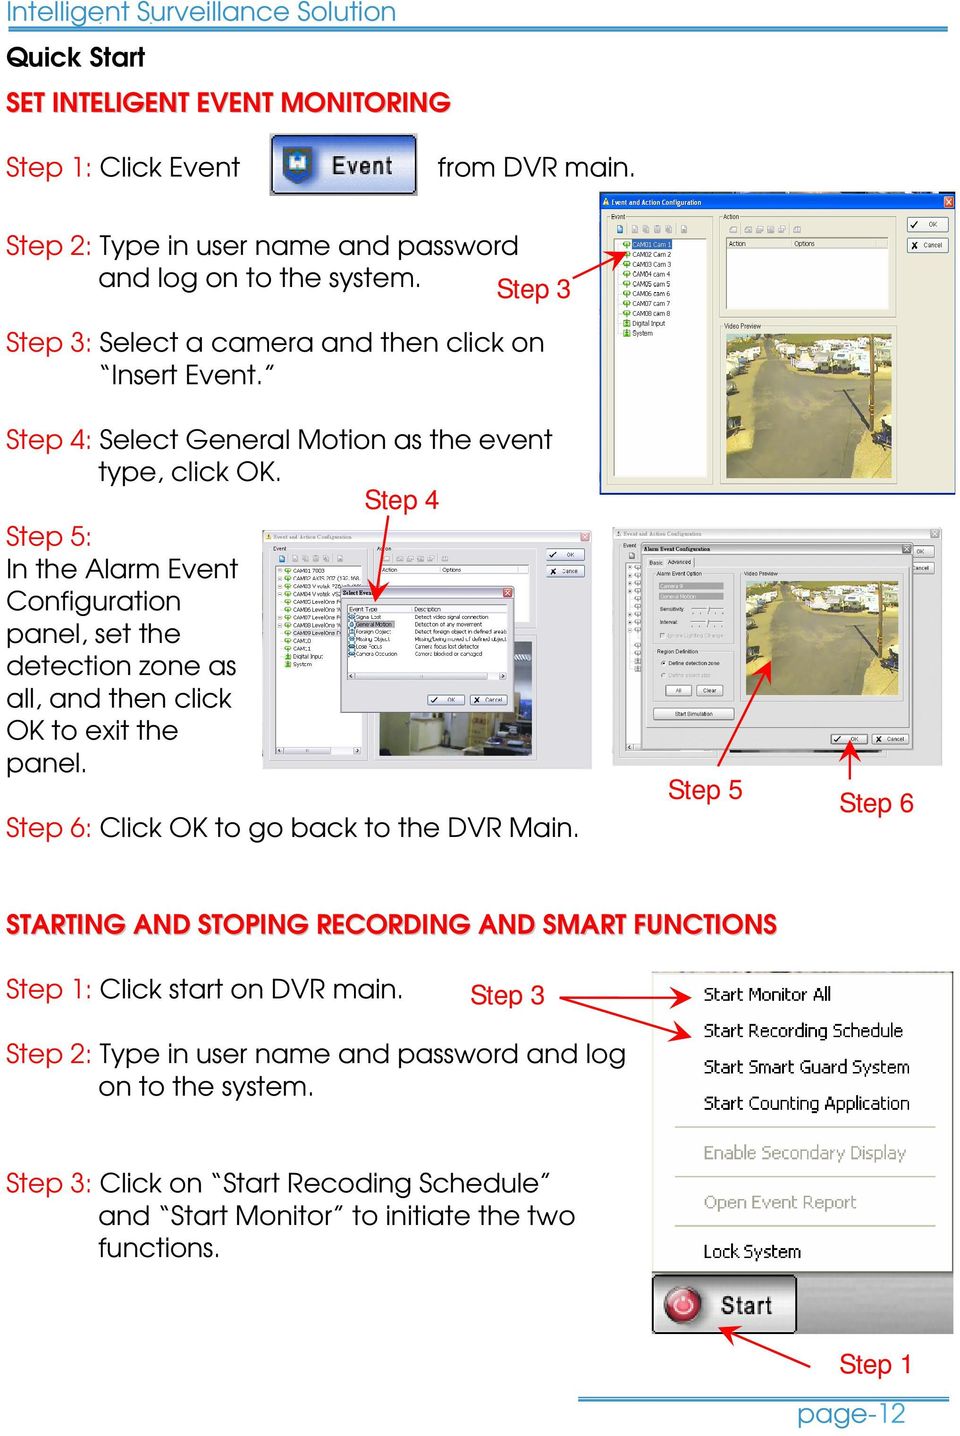 Step 4 Step 5: In the Alarm Event Configuration panel, set the detection zone as all, and then click OK to exit the panel. Step 6: Click OK to go back to the DVR Main.